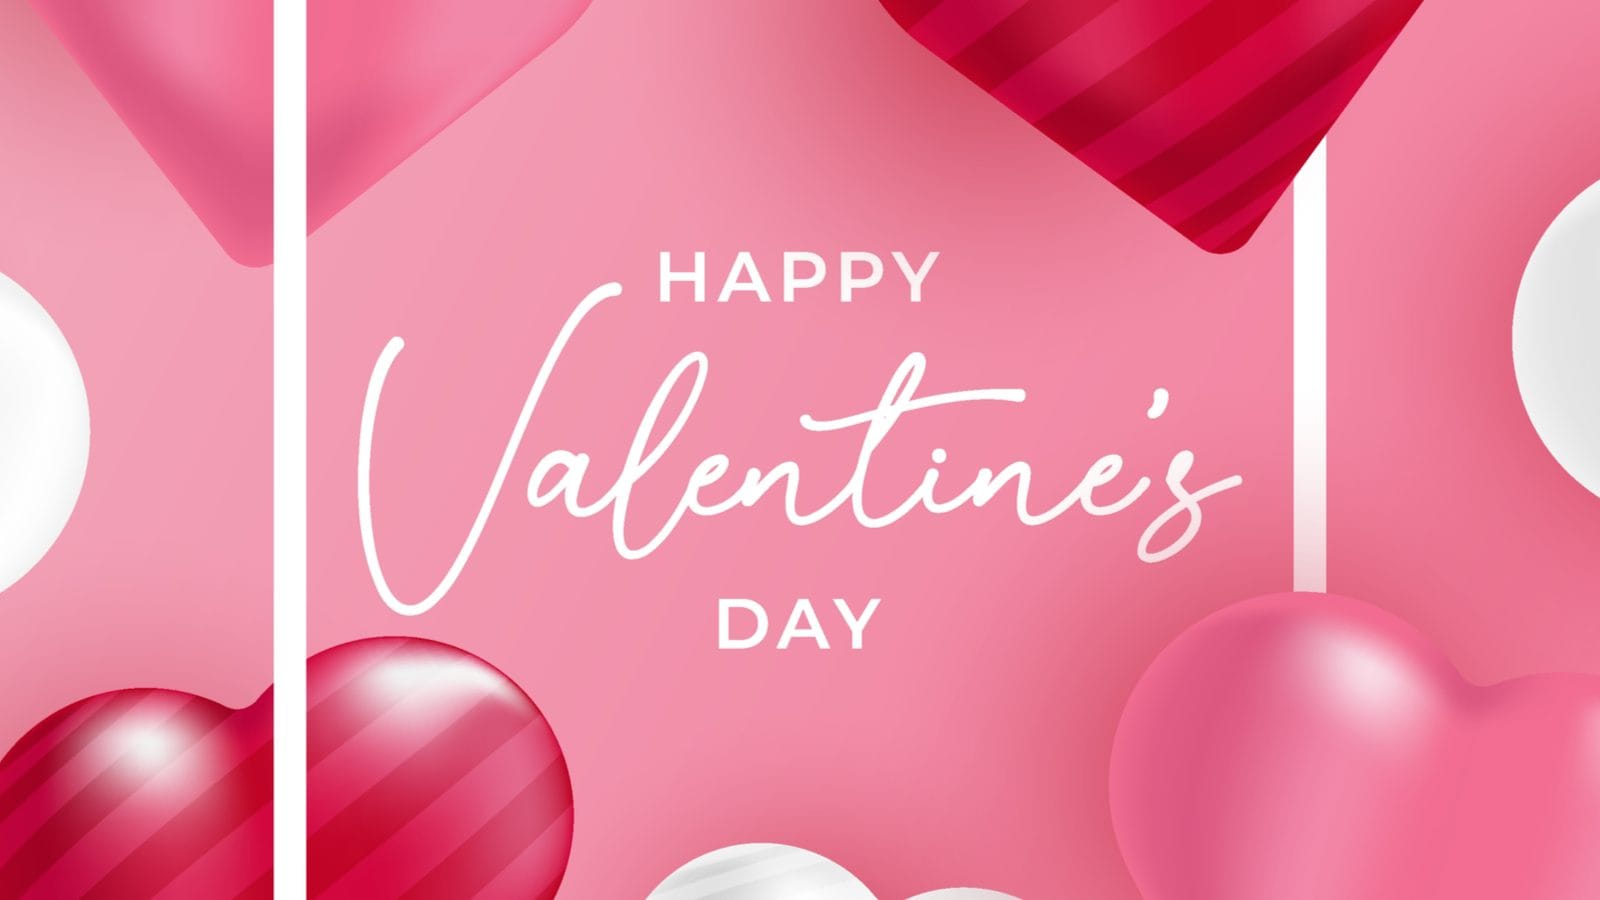 Happy Valentine's Day 2022: Make your Valentine's Day Special with